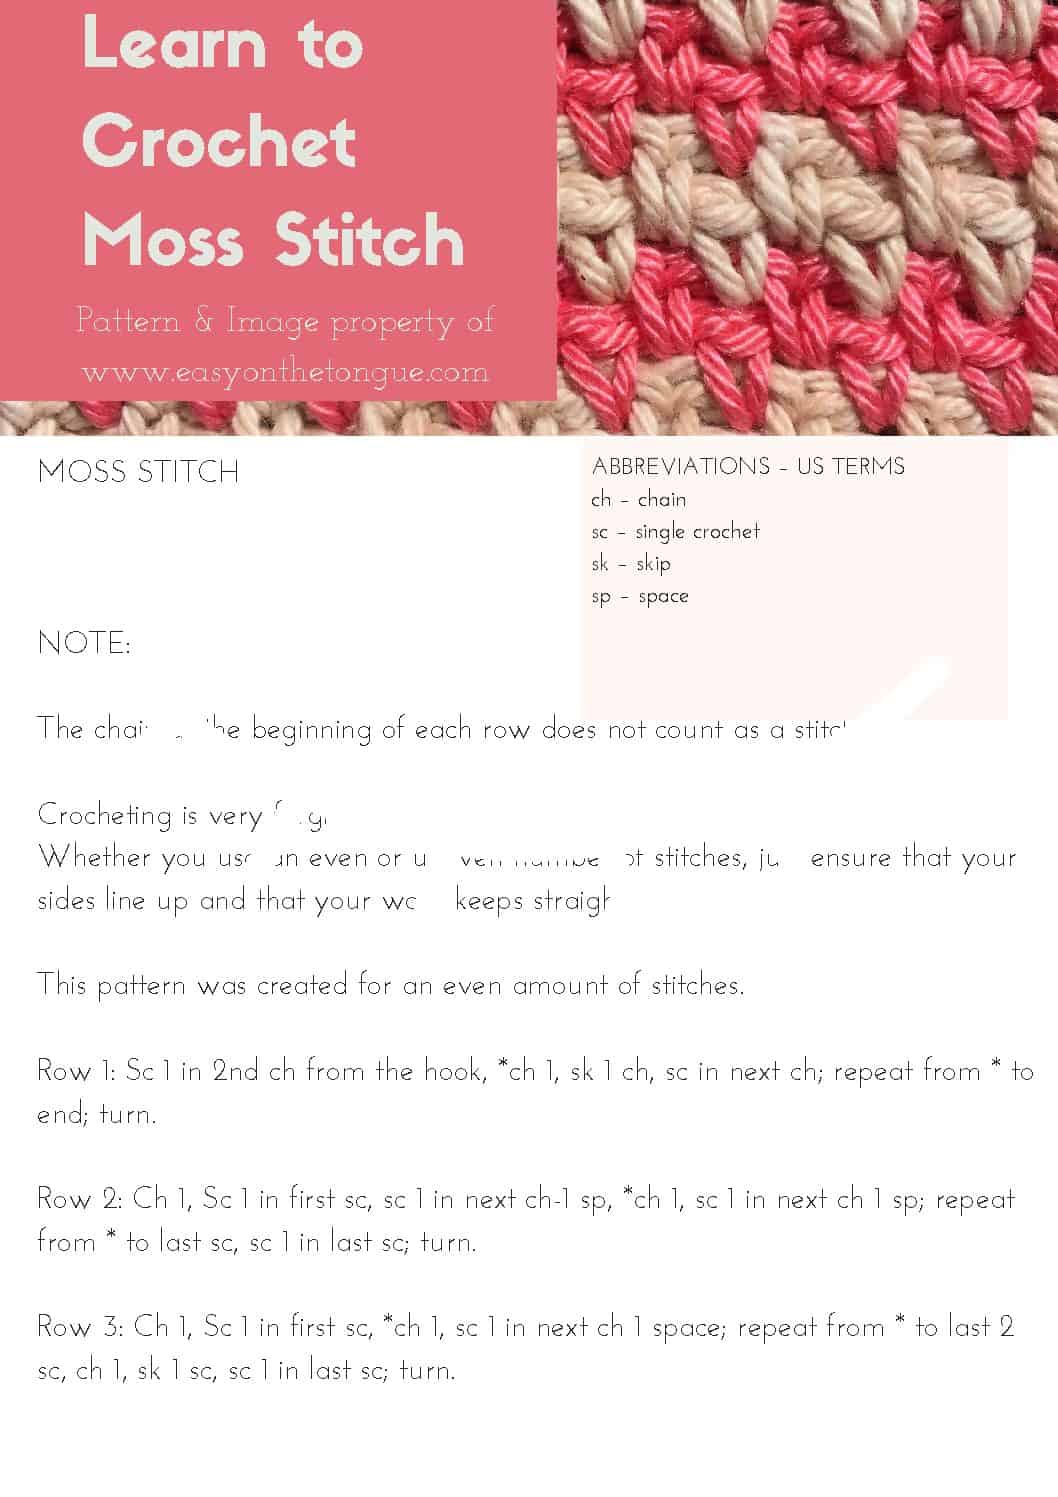 Learn to Crochet Moss Stitch A4 1 pdf Quick and Easy Crochet Stitches – How to Moss Stitch